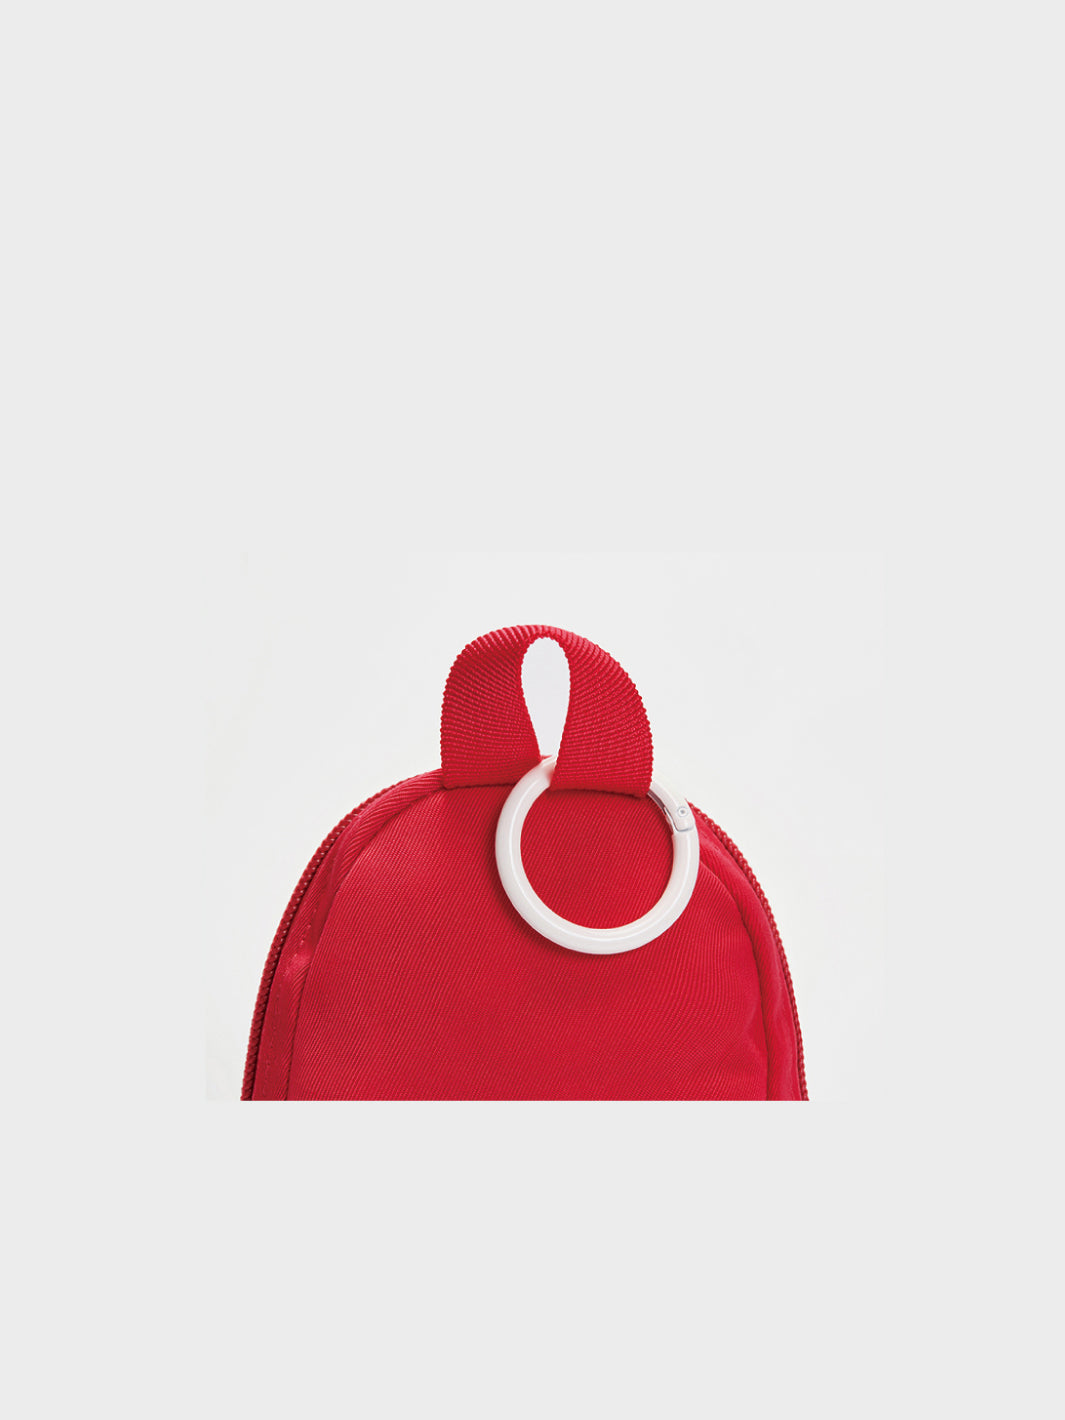 PACKMAN POUCH